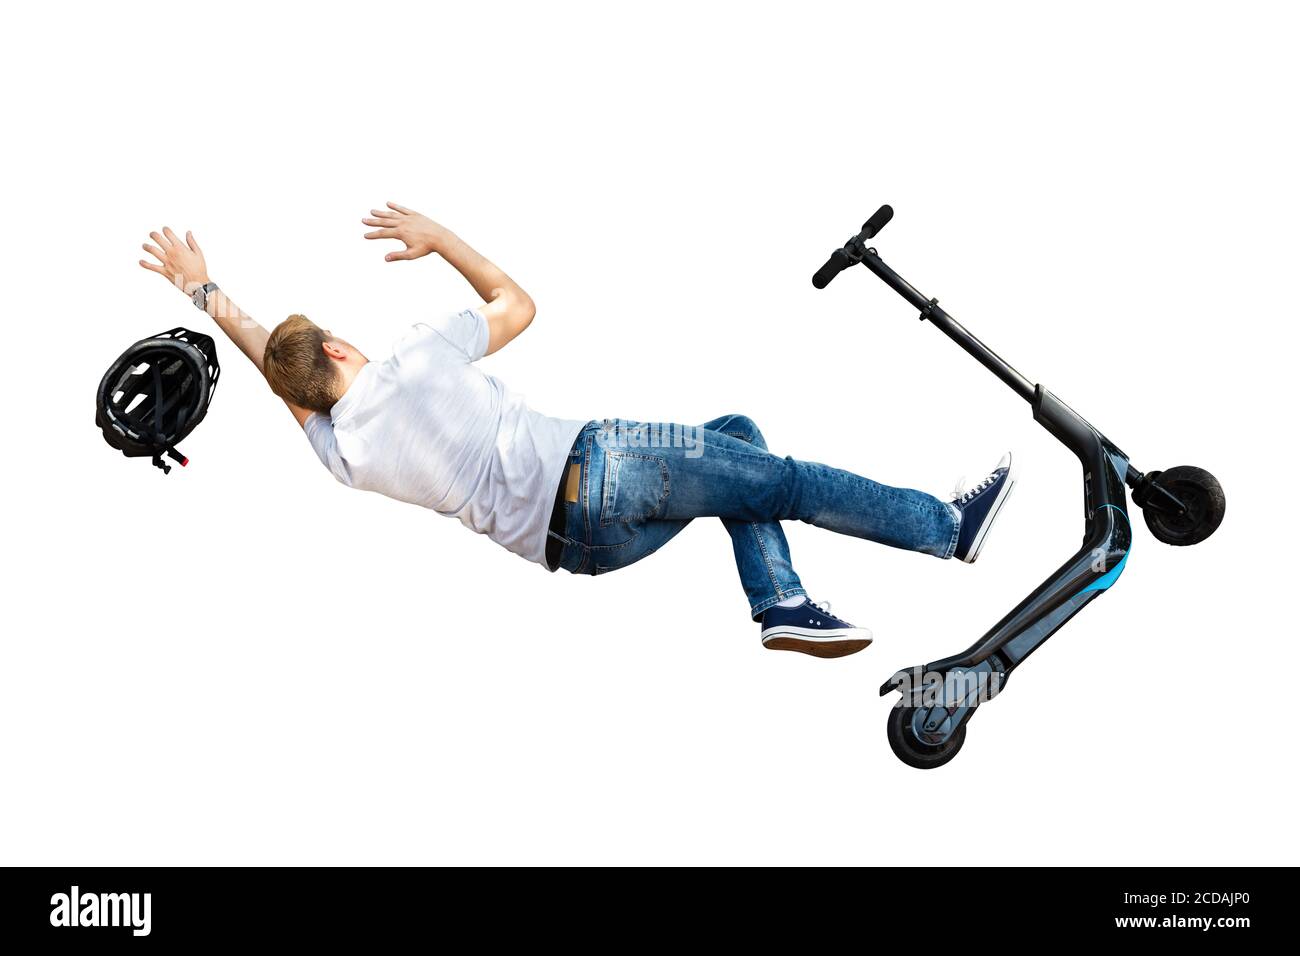 Electric E Scooter Collision Accident. Human Falling Stock Photo